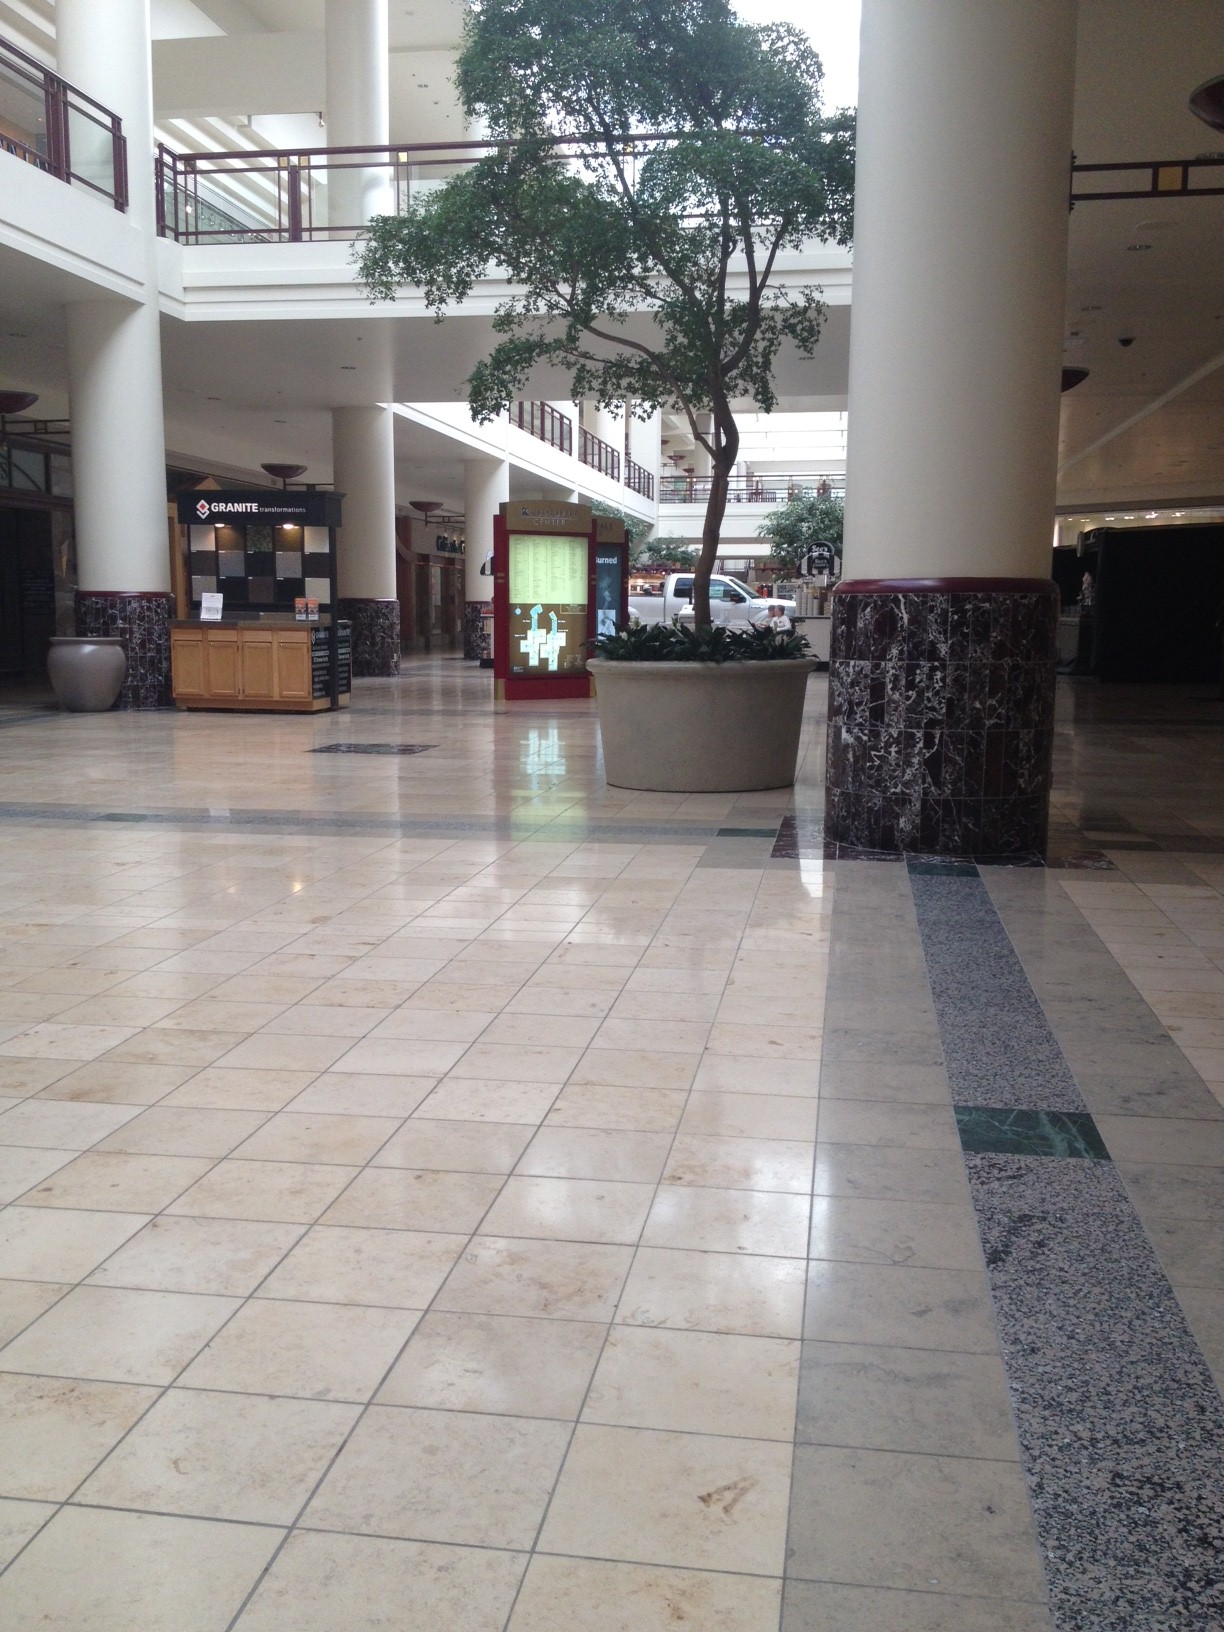 I love the smell of a mall in the morning